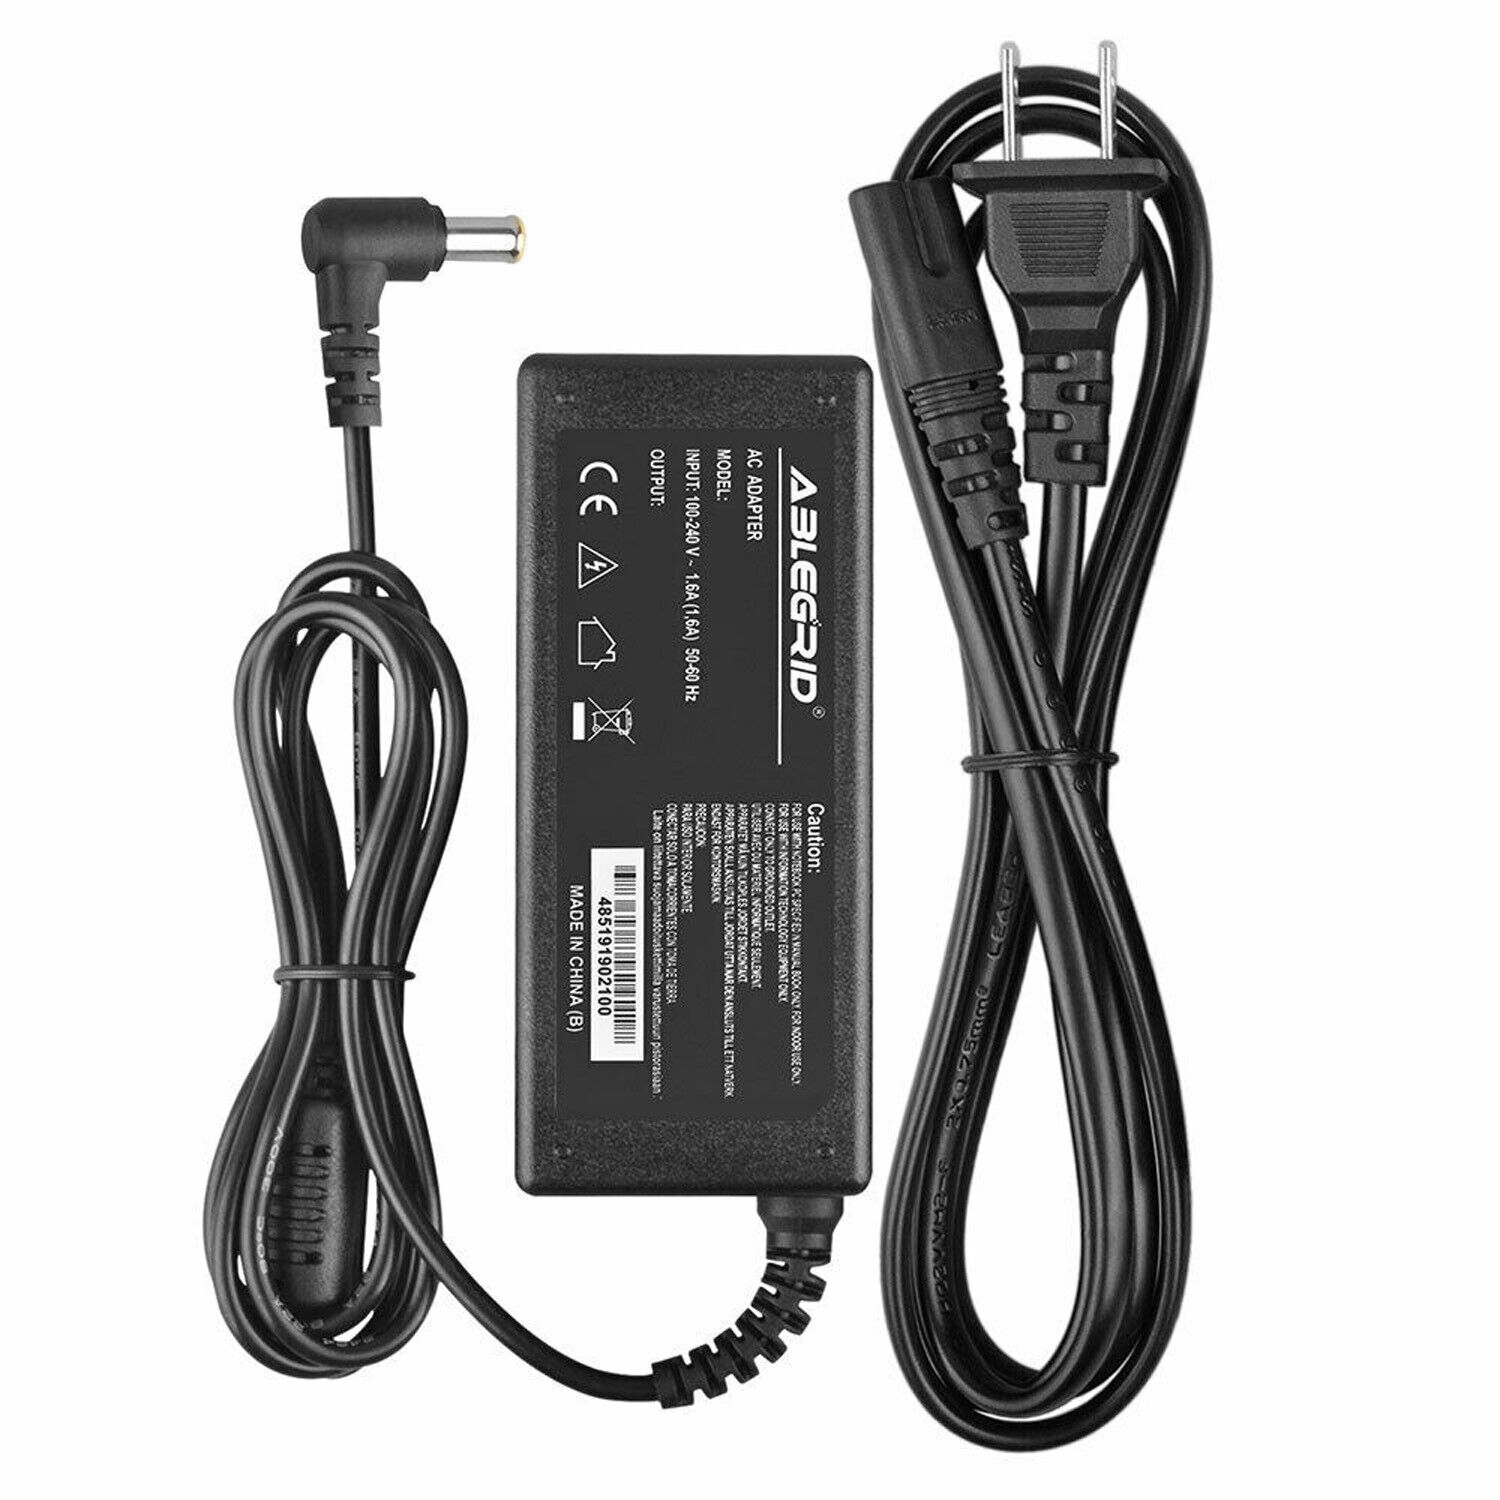 AC Adapter for Samsung U24E590D LU24E590DS/ZA Monitor Power Charger Supply Cord